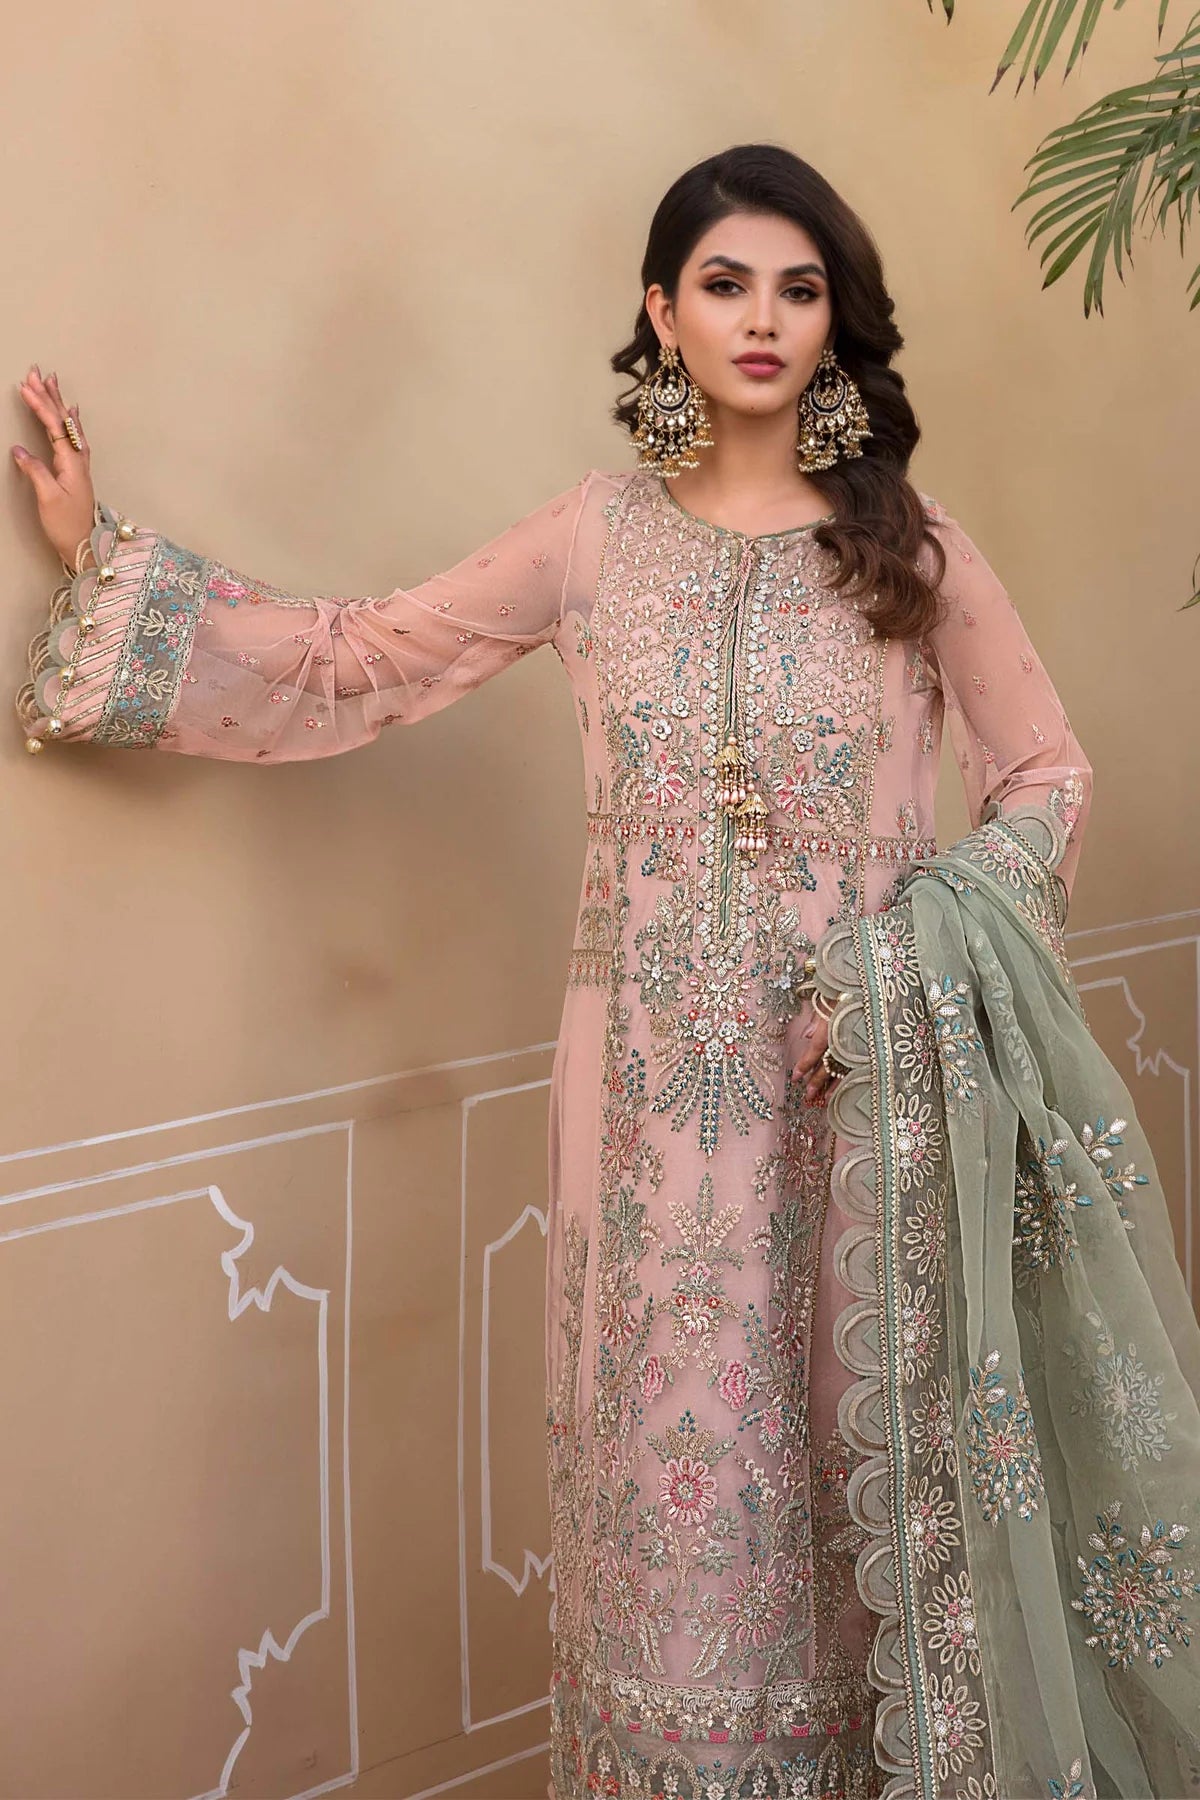 Maria B Inspired Mbroidered Peach 3 Piece Wedding Outfit - Desi Posh